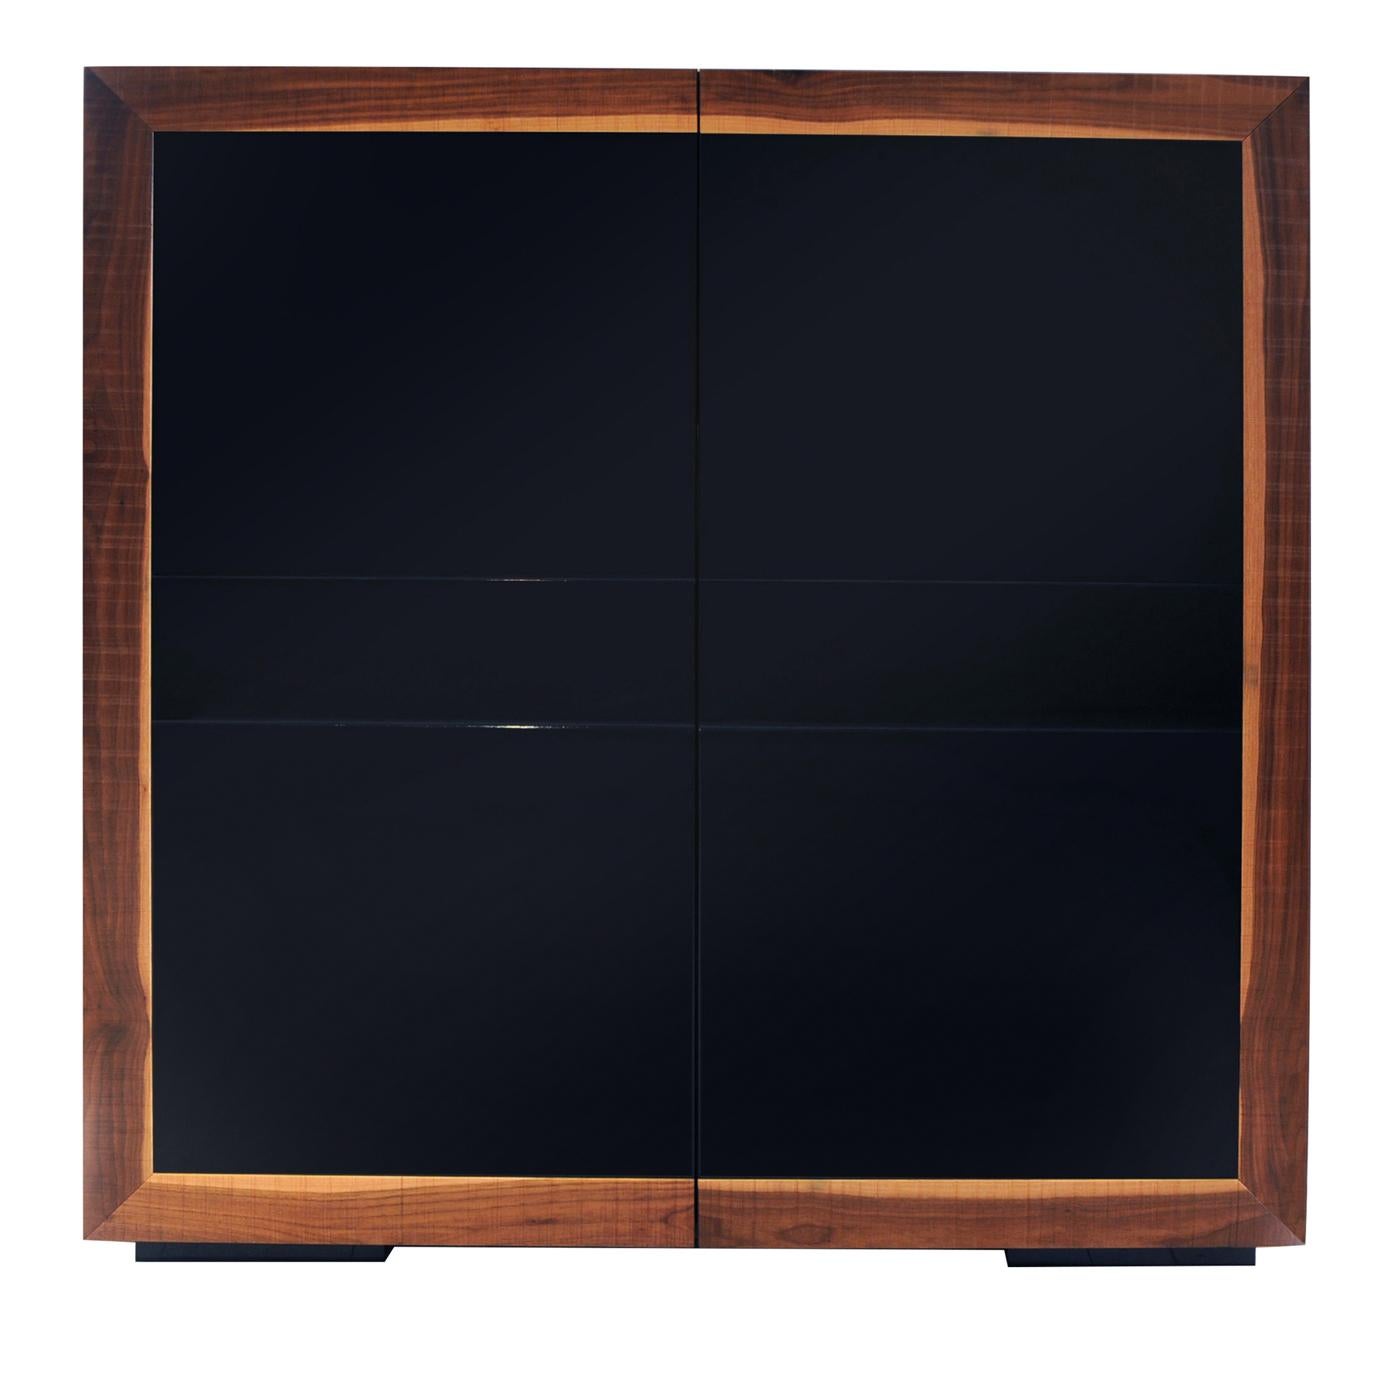 Superbly crafted with a sleek and functional silhouette, this cabinet boasts an elegant design in which the refined materials merge in perfect harmony. It is fashioned of solid Canaletto walnut, visible on the squared edges of the piece and the